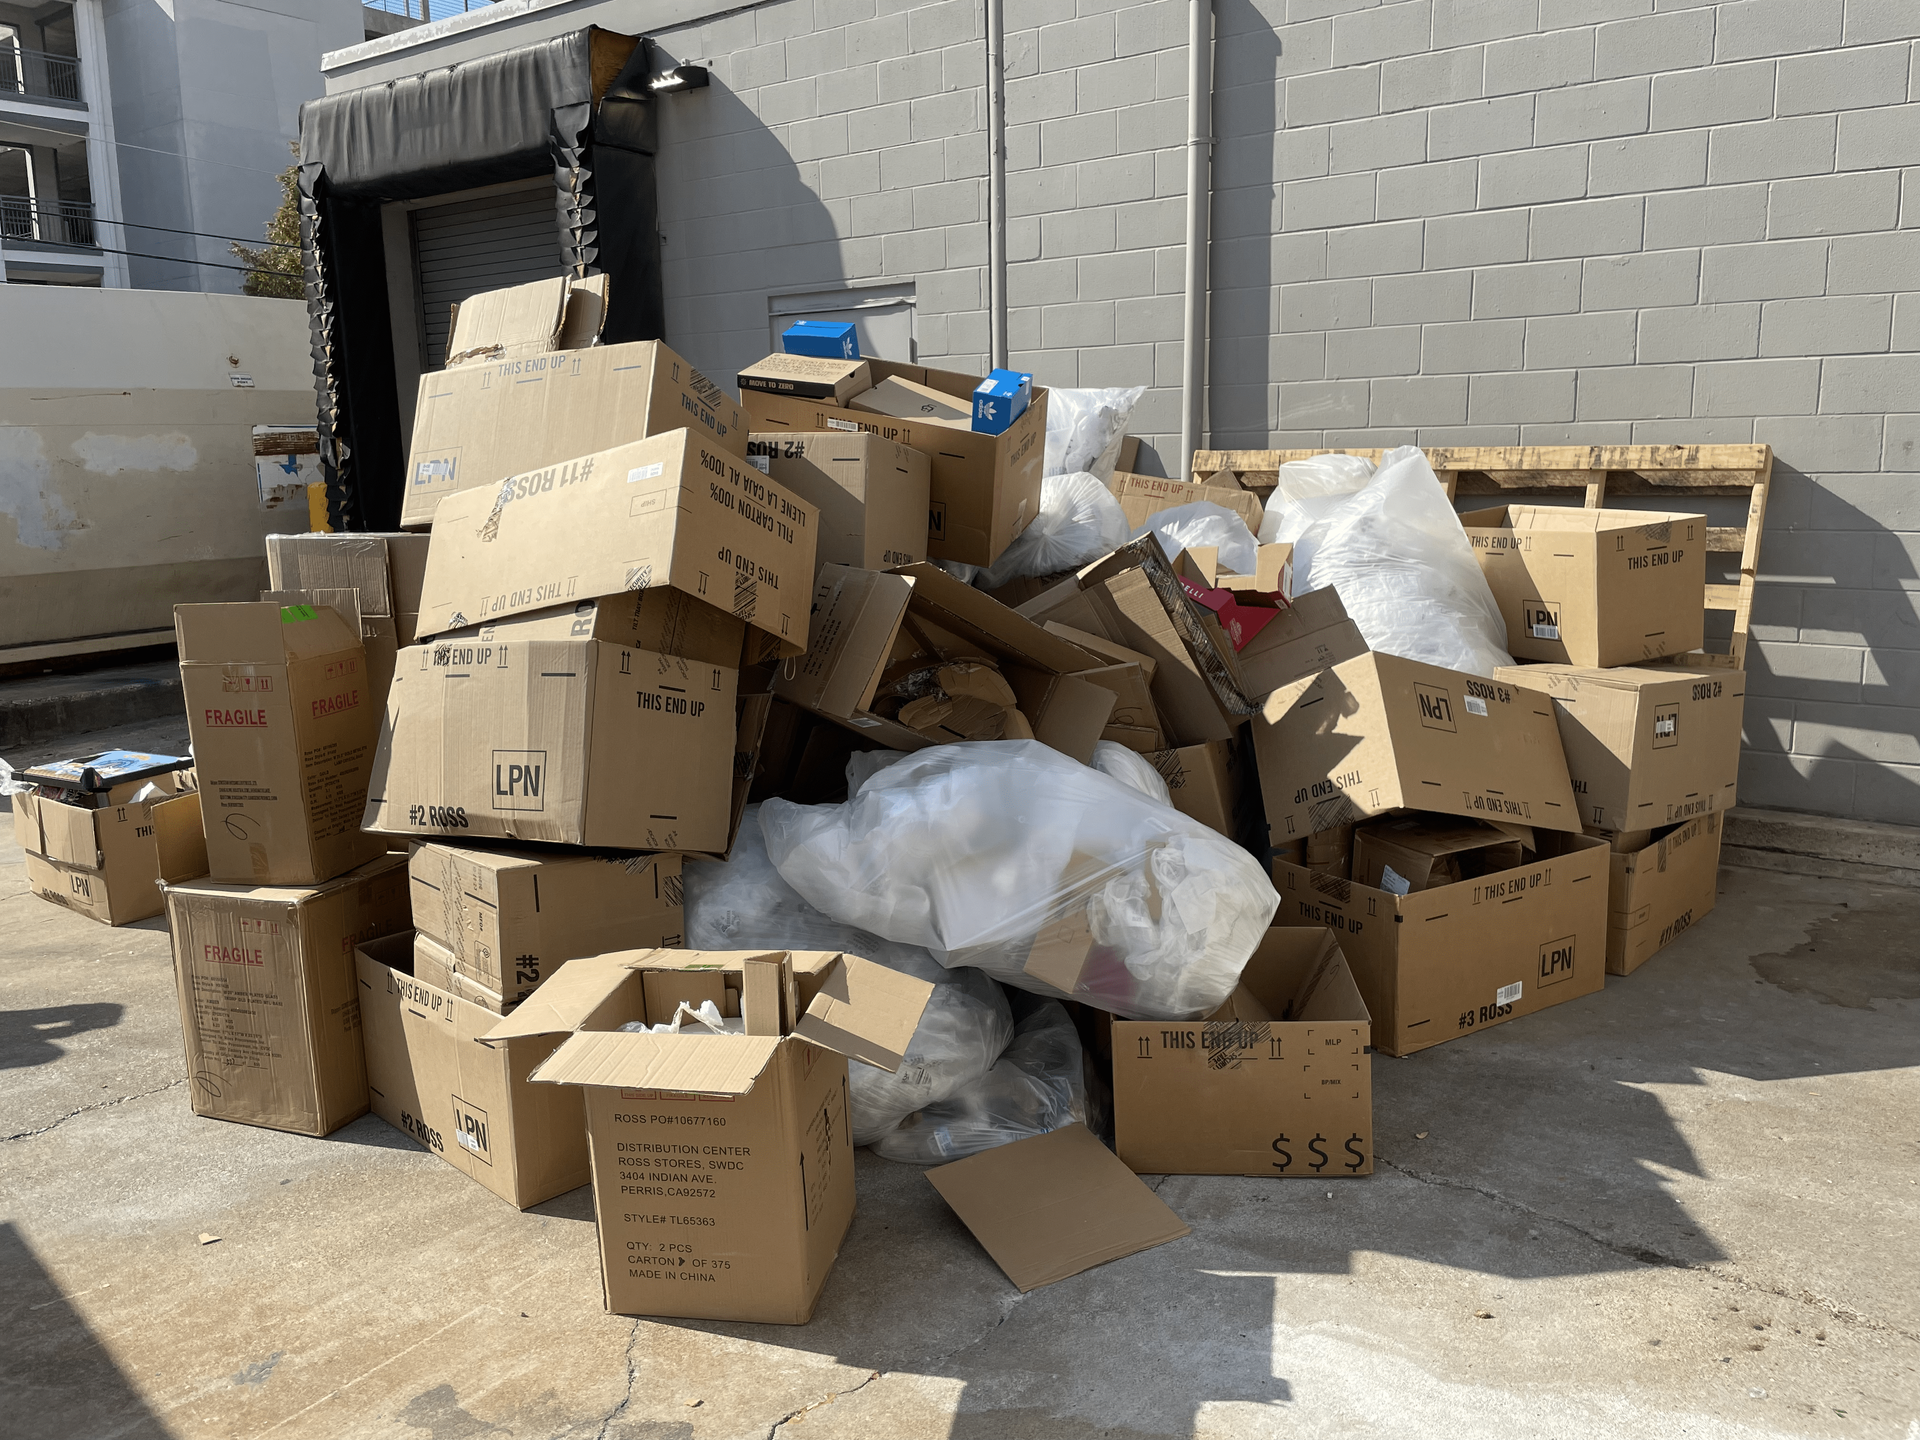 a pile of cardboard boxes and plastic bags in a parking lot .